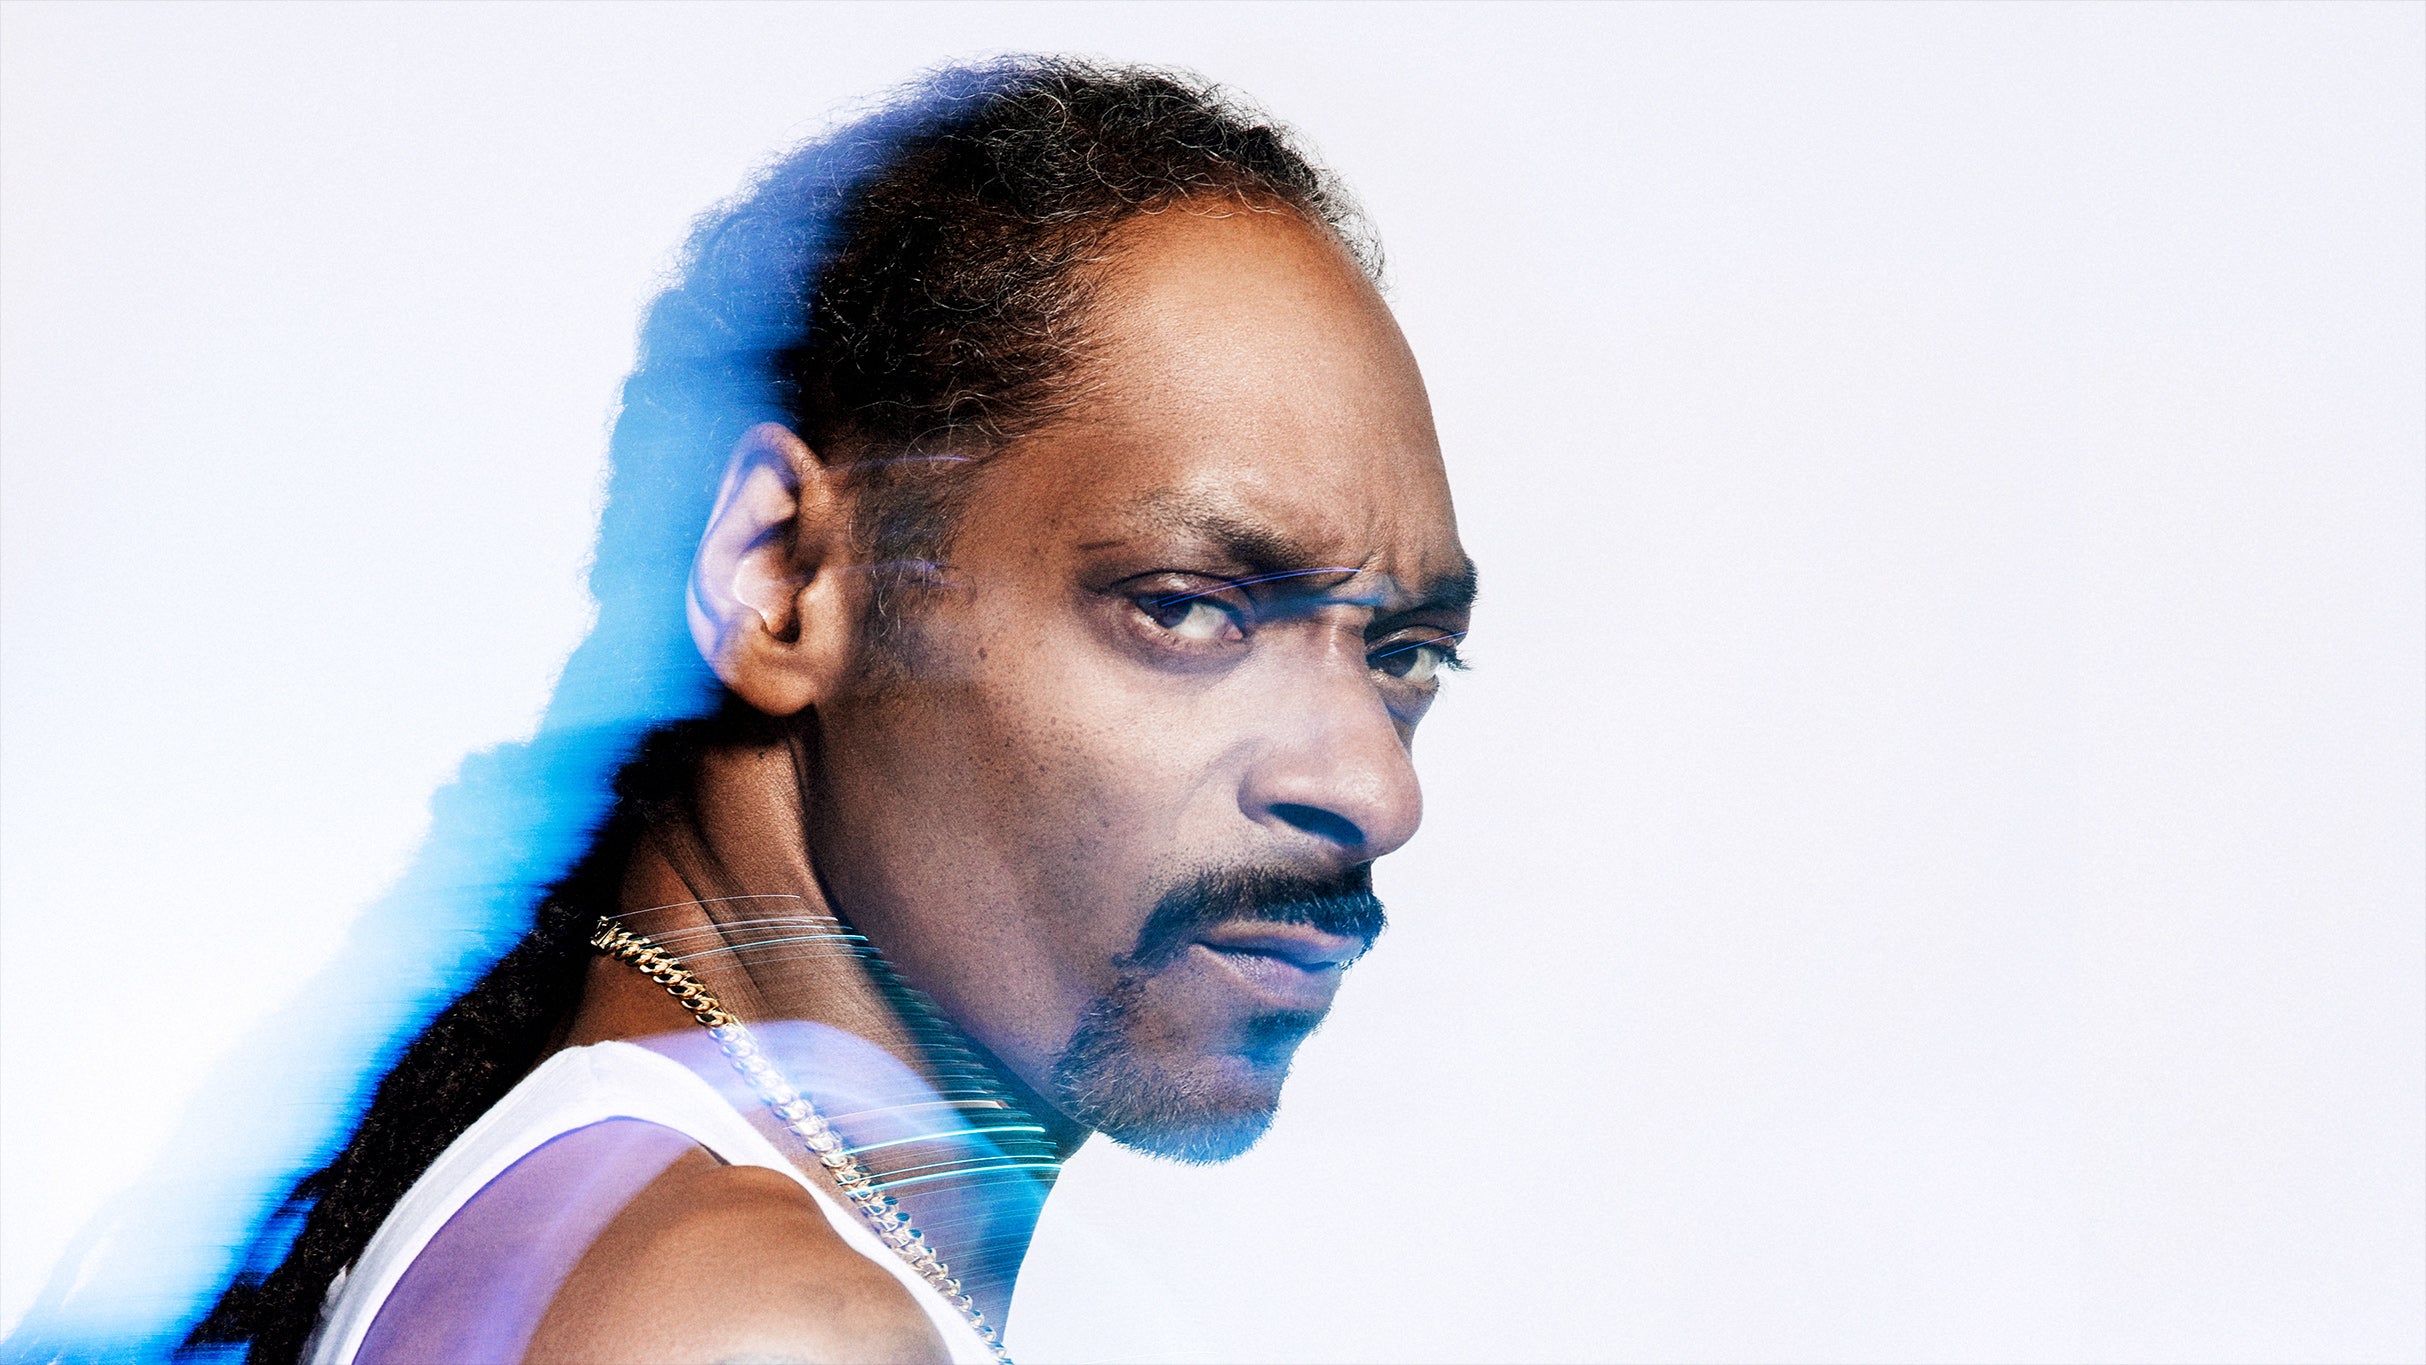 Snoop Dogg - Cali To Canada Tour  presale passcode for advance tickets in Saskatoon